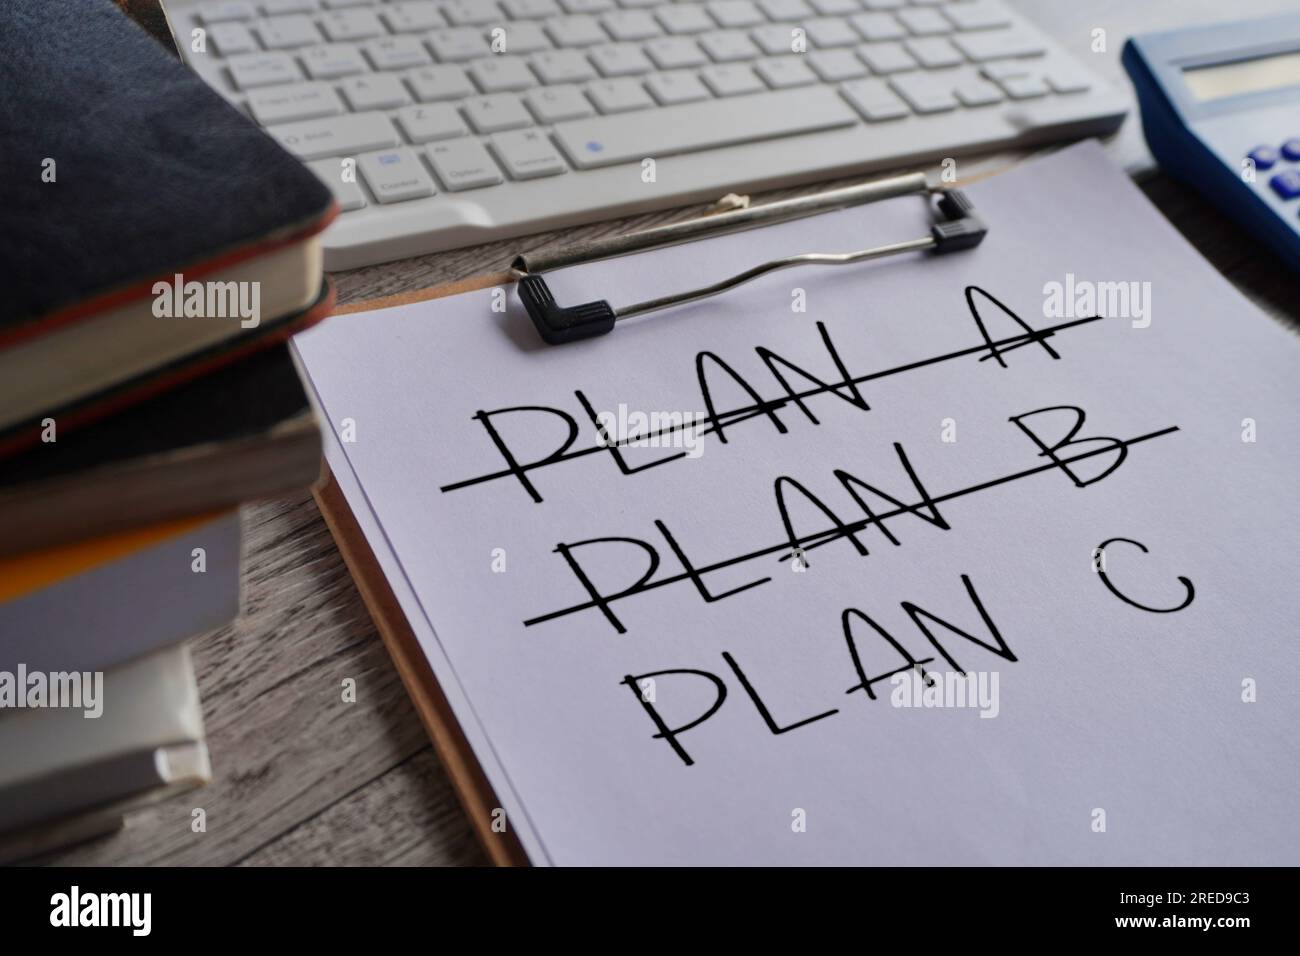 Crossing out Plan A and Plan B and writing Plan C. Concept for change of plan. Stock Photo